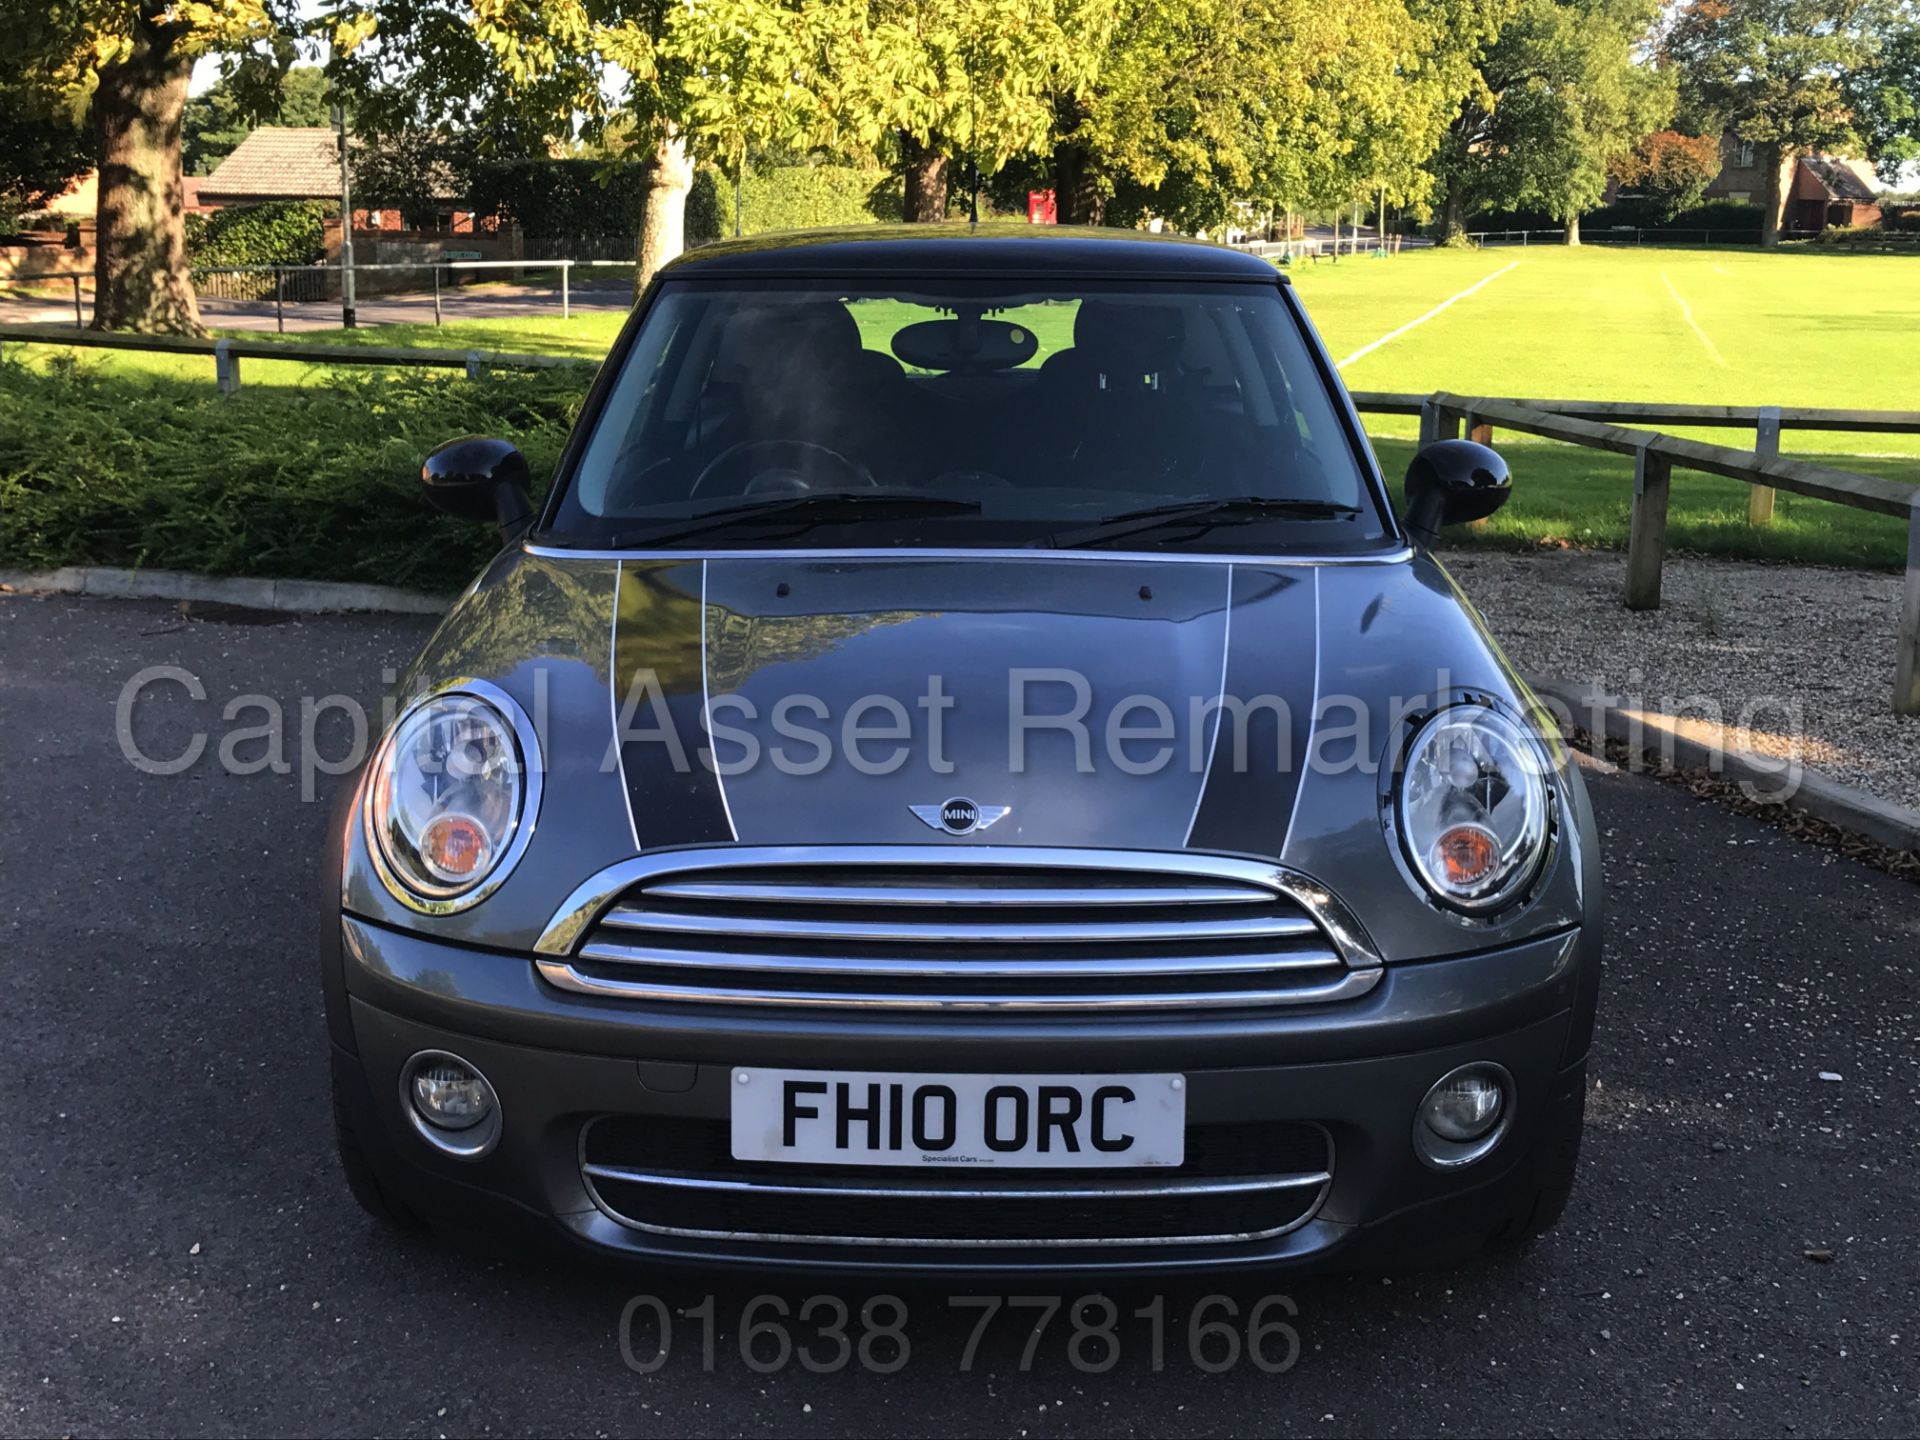 MINI COOPER D 'GRAPHITE EDITION' (2010) '1.6 DIESEL - 6 SPEED - LEATHER - STOP / START' (NO VAT) - Image 3 of 28